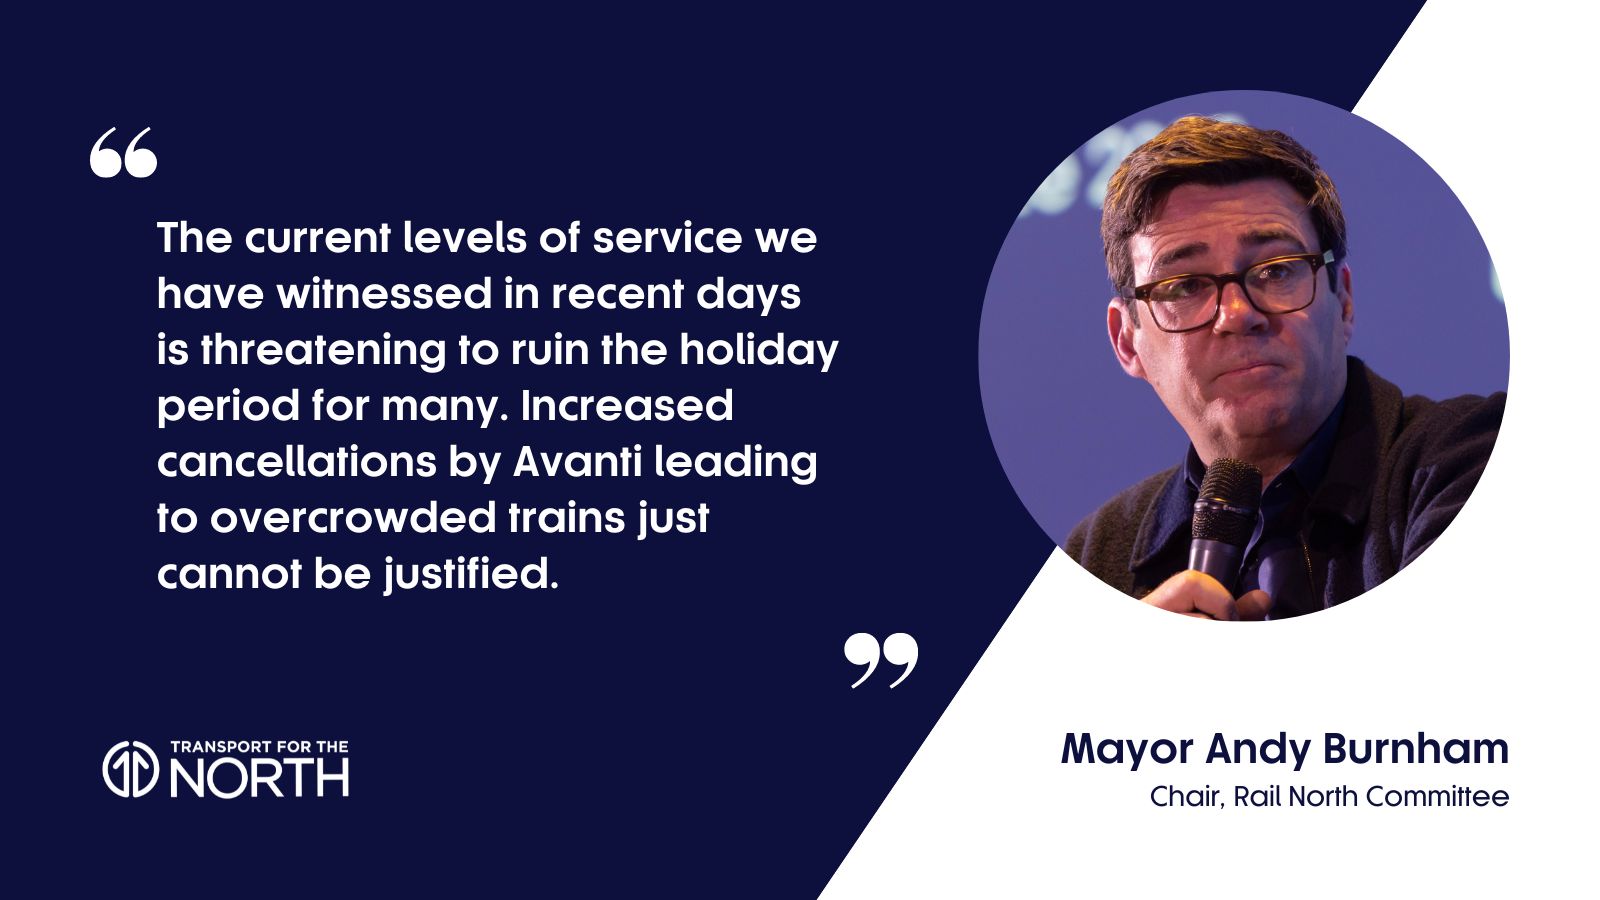 Mayor Andy Burnham talks about the Avanti service level in the North West